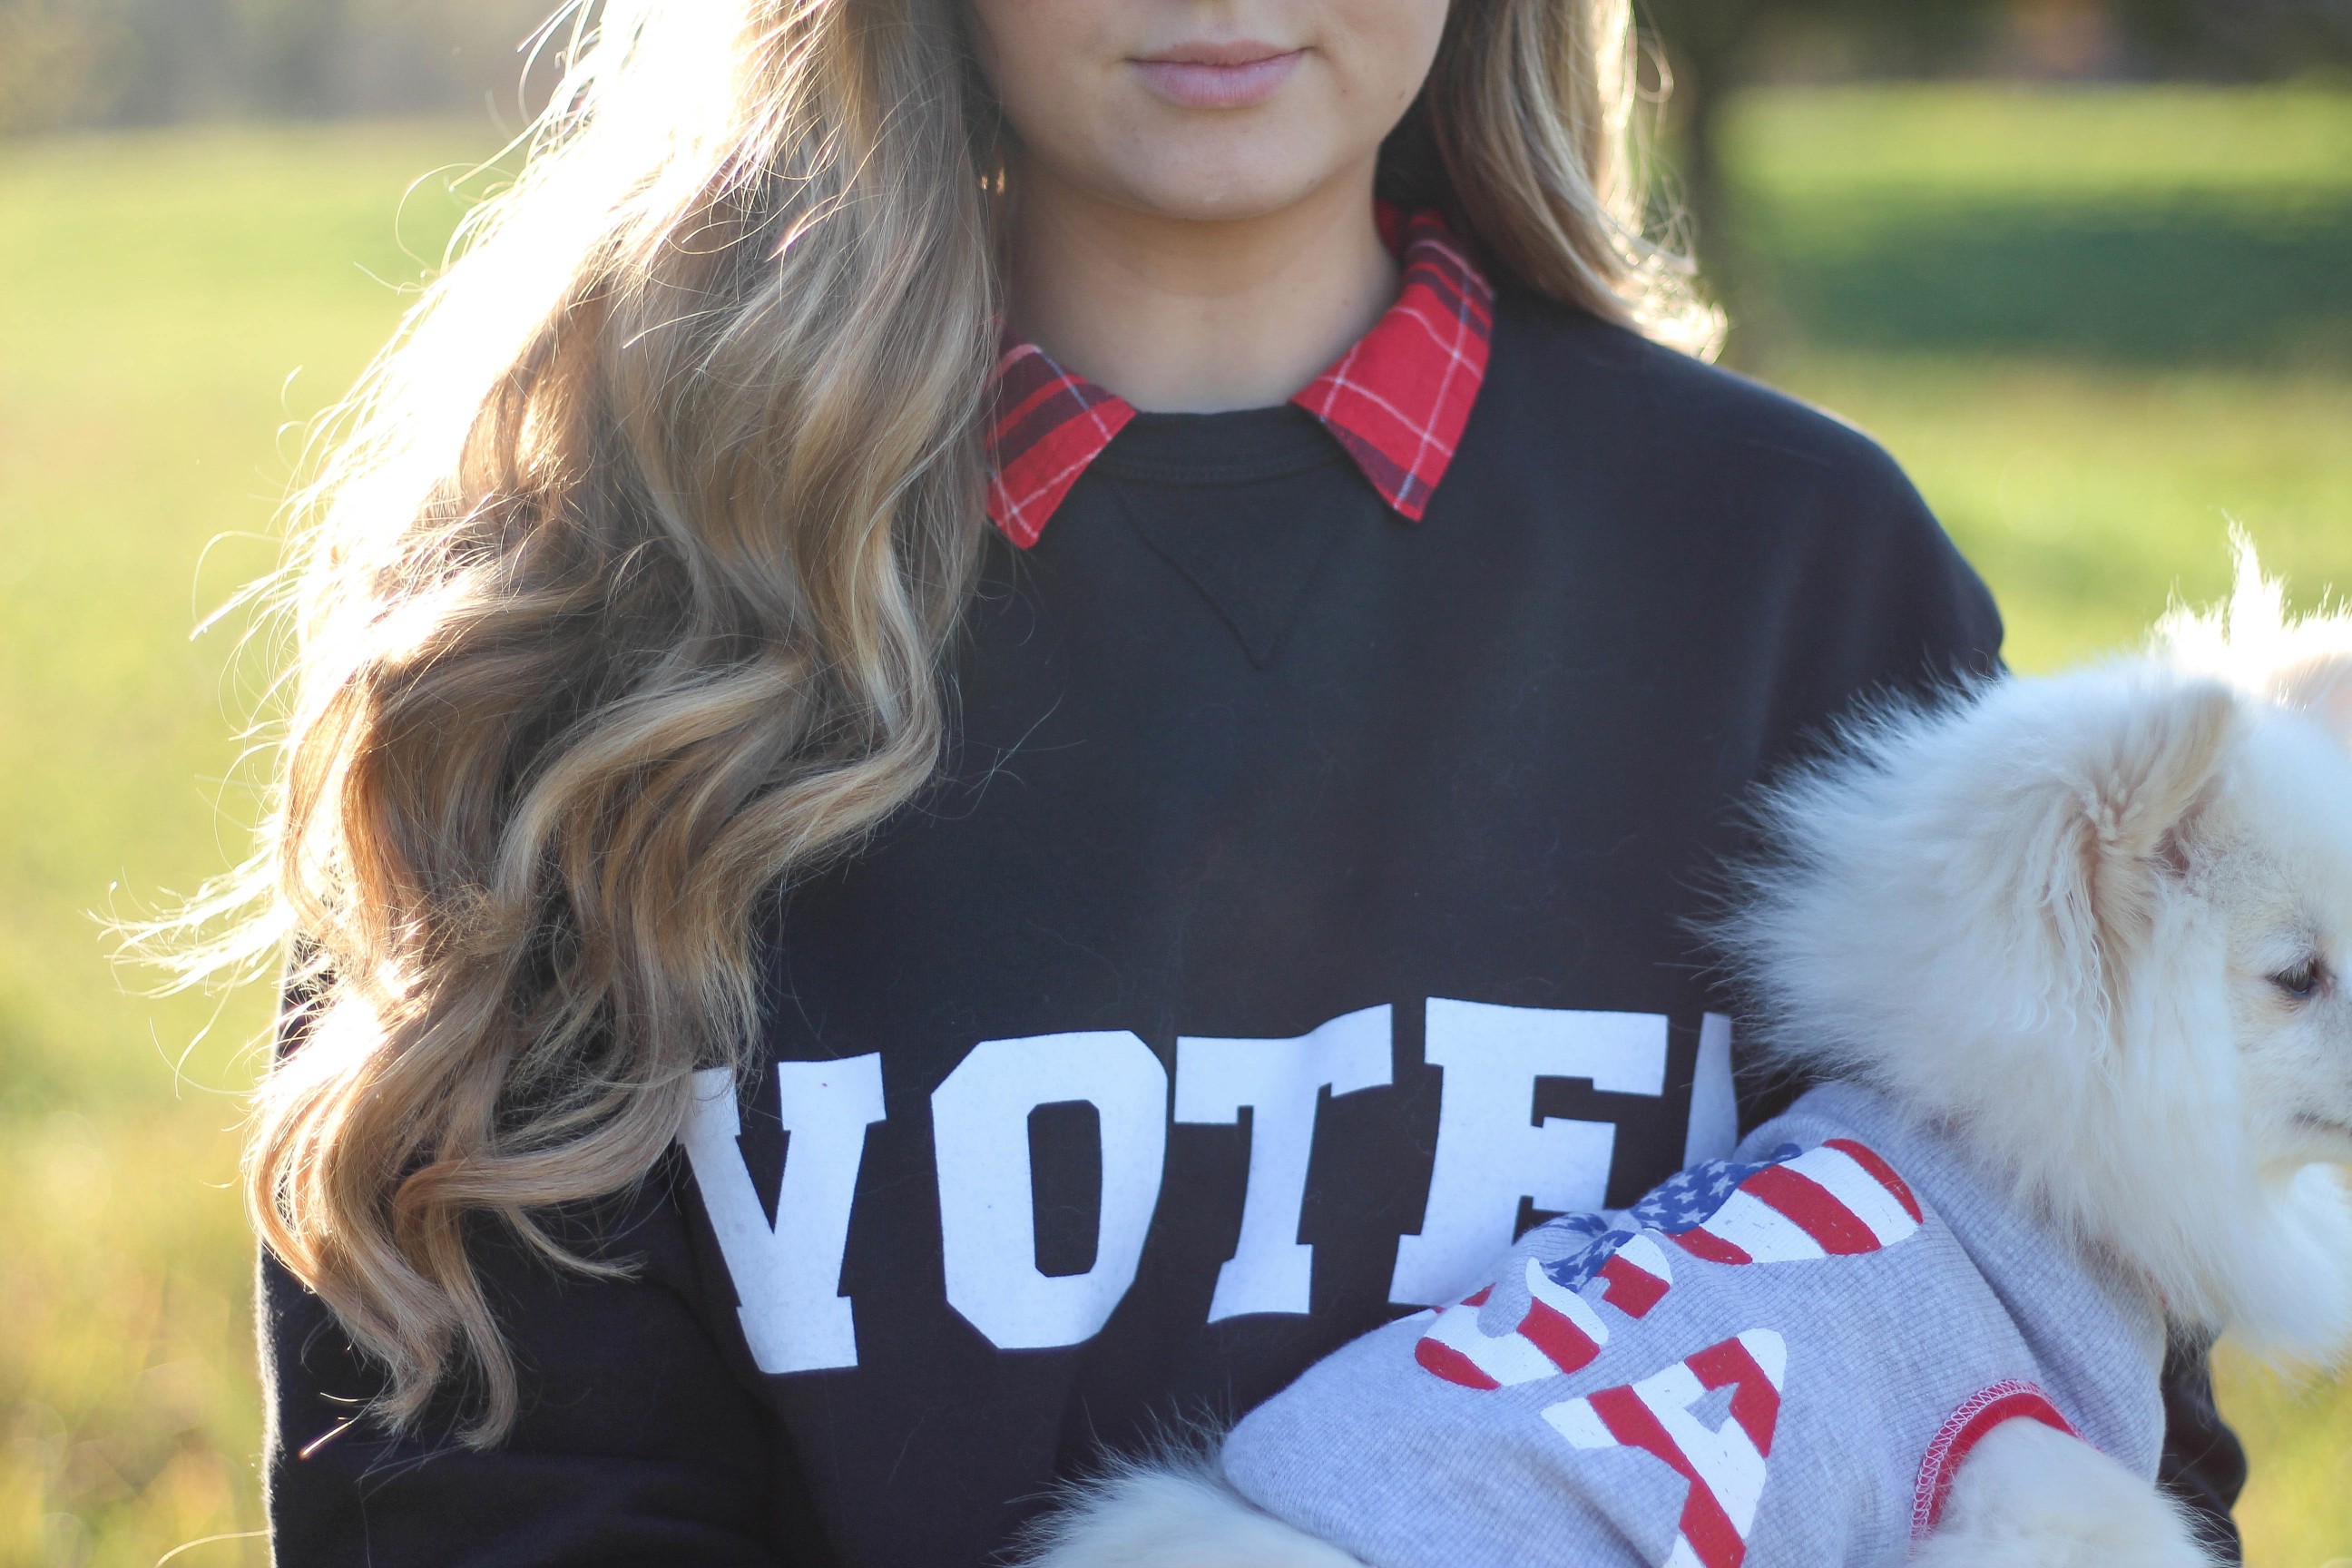 DIY Sweatshirt 2016 election day vote sweatshirt flannel layer outfit pomeranian OOTD outfit by daily dose of charm by lauren lindmark